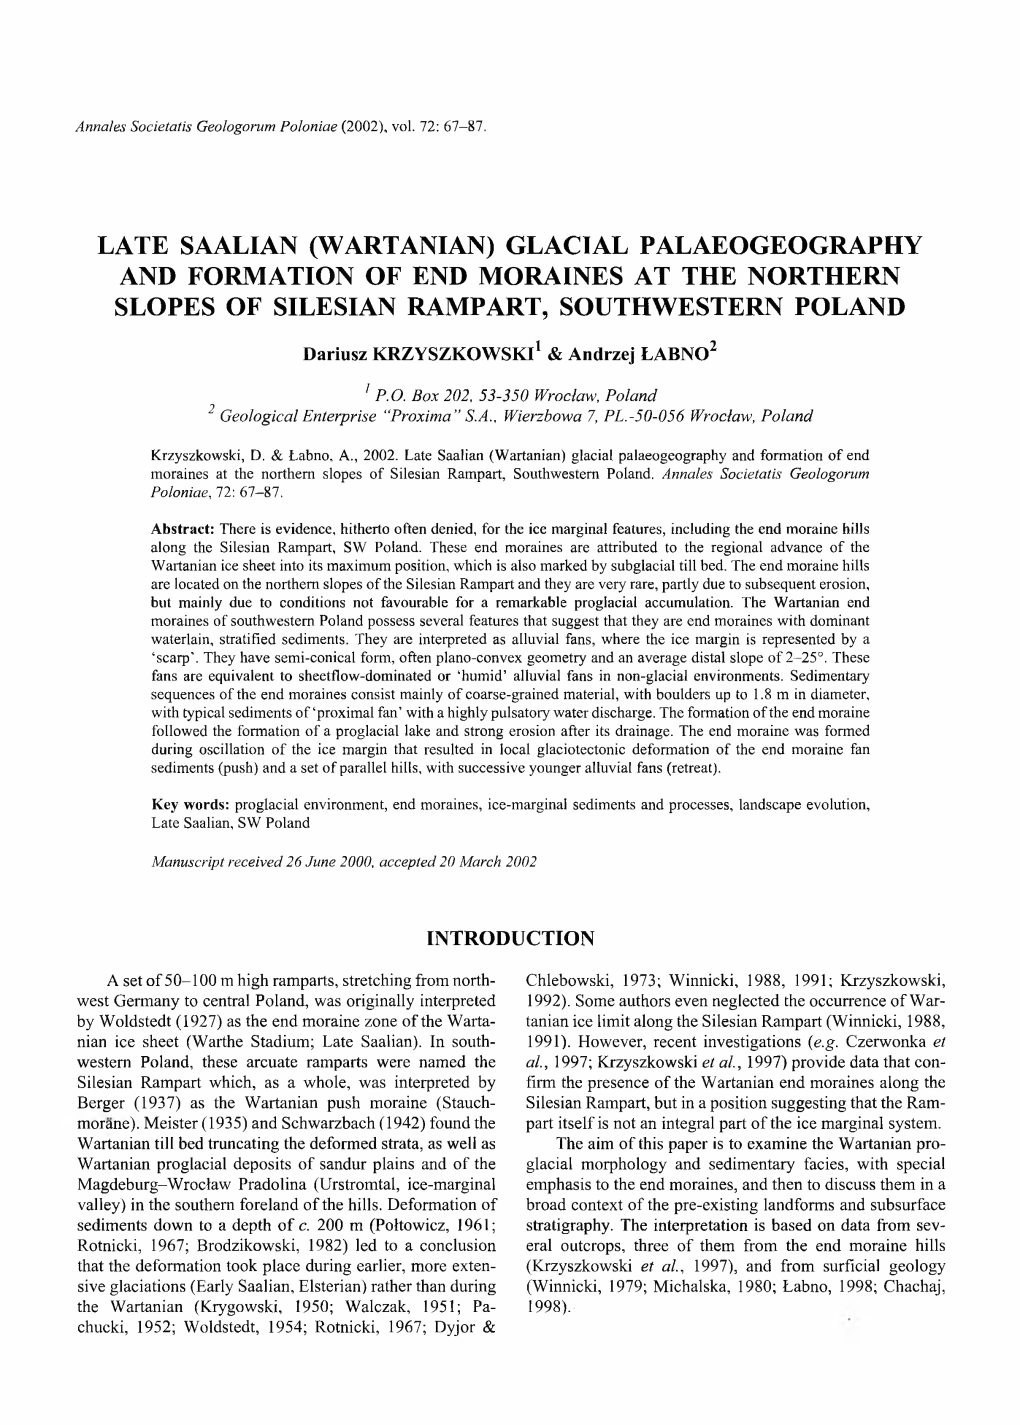 Late Saalian (Wartanian) Glacial Palaeogeography and Formation of End Moraines at the Northern Slopes of Silesian Rampart, Southwestern Poland